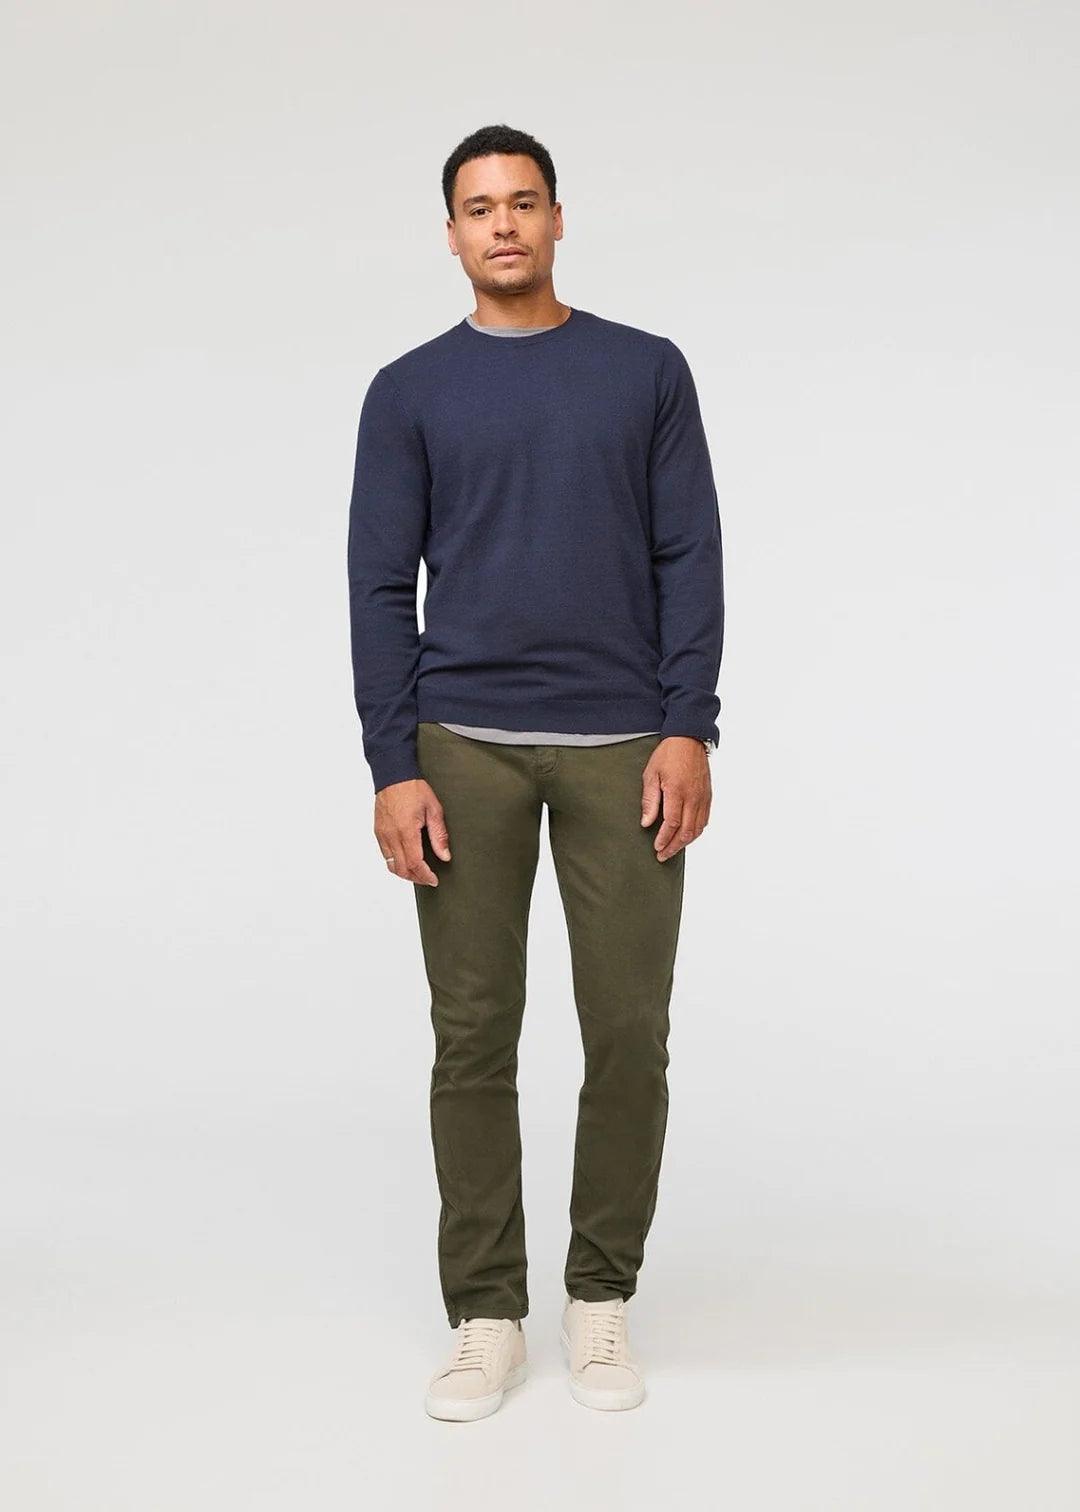 Relaxed Fix Dress Pant - Sprig Flower Co